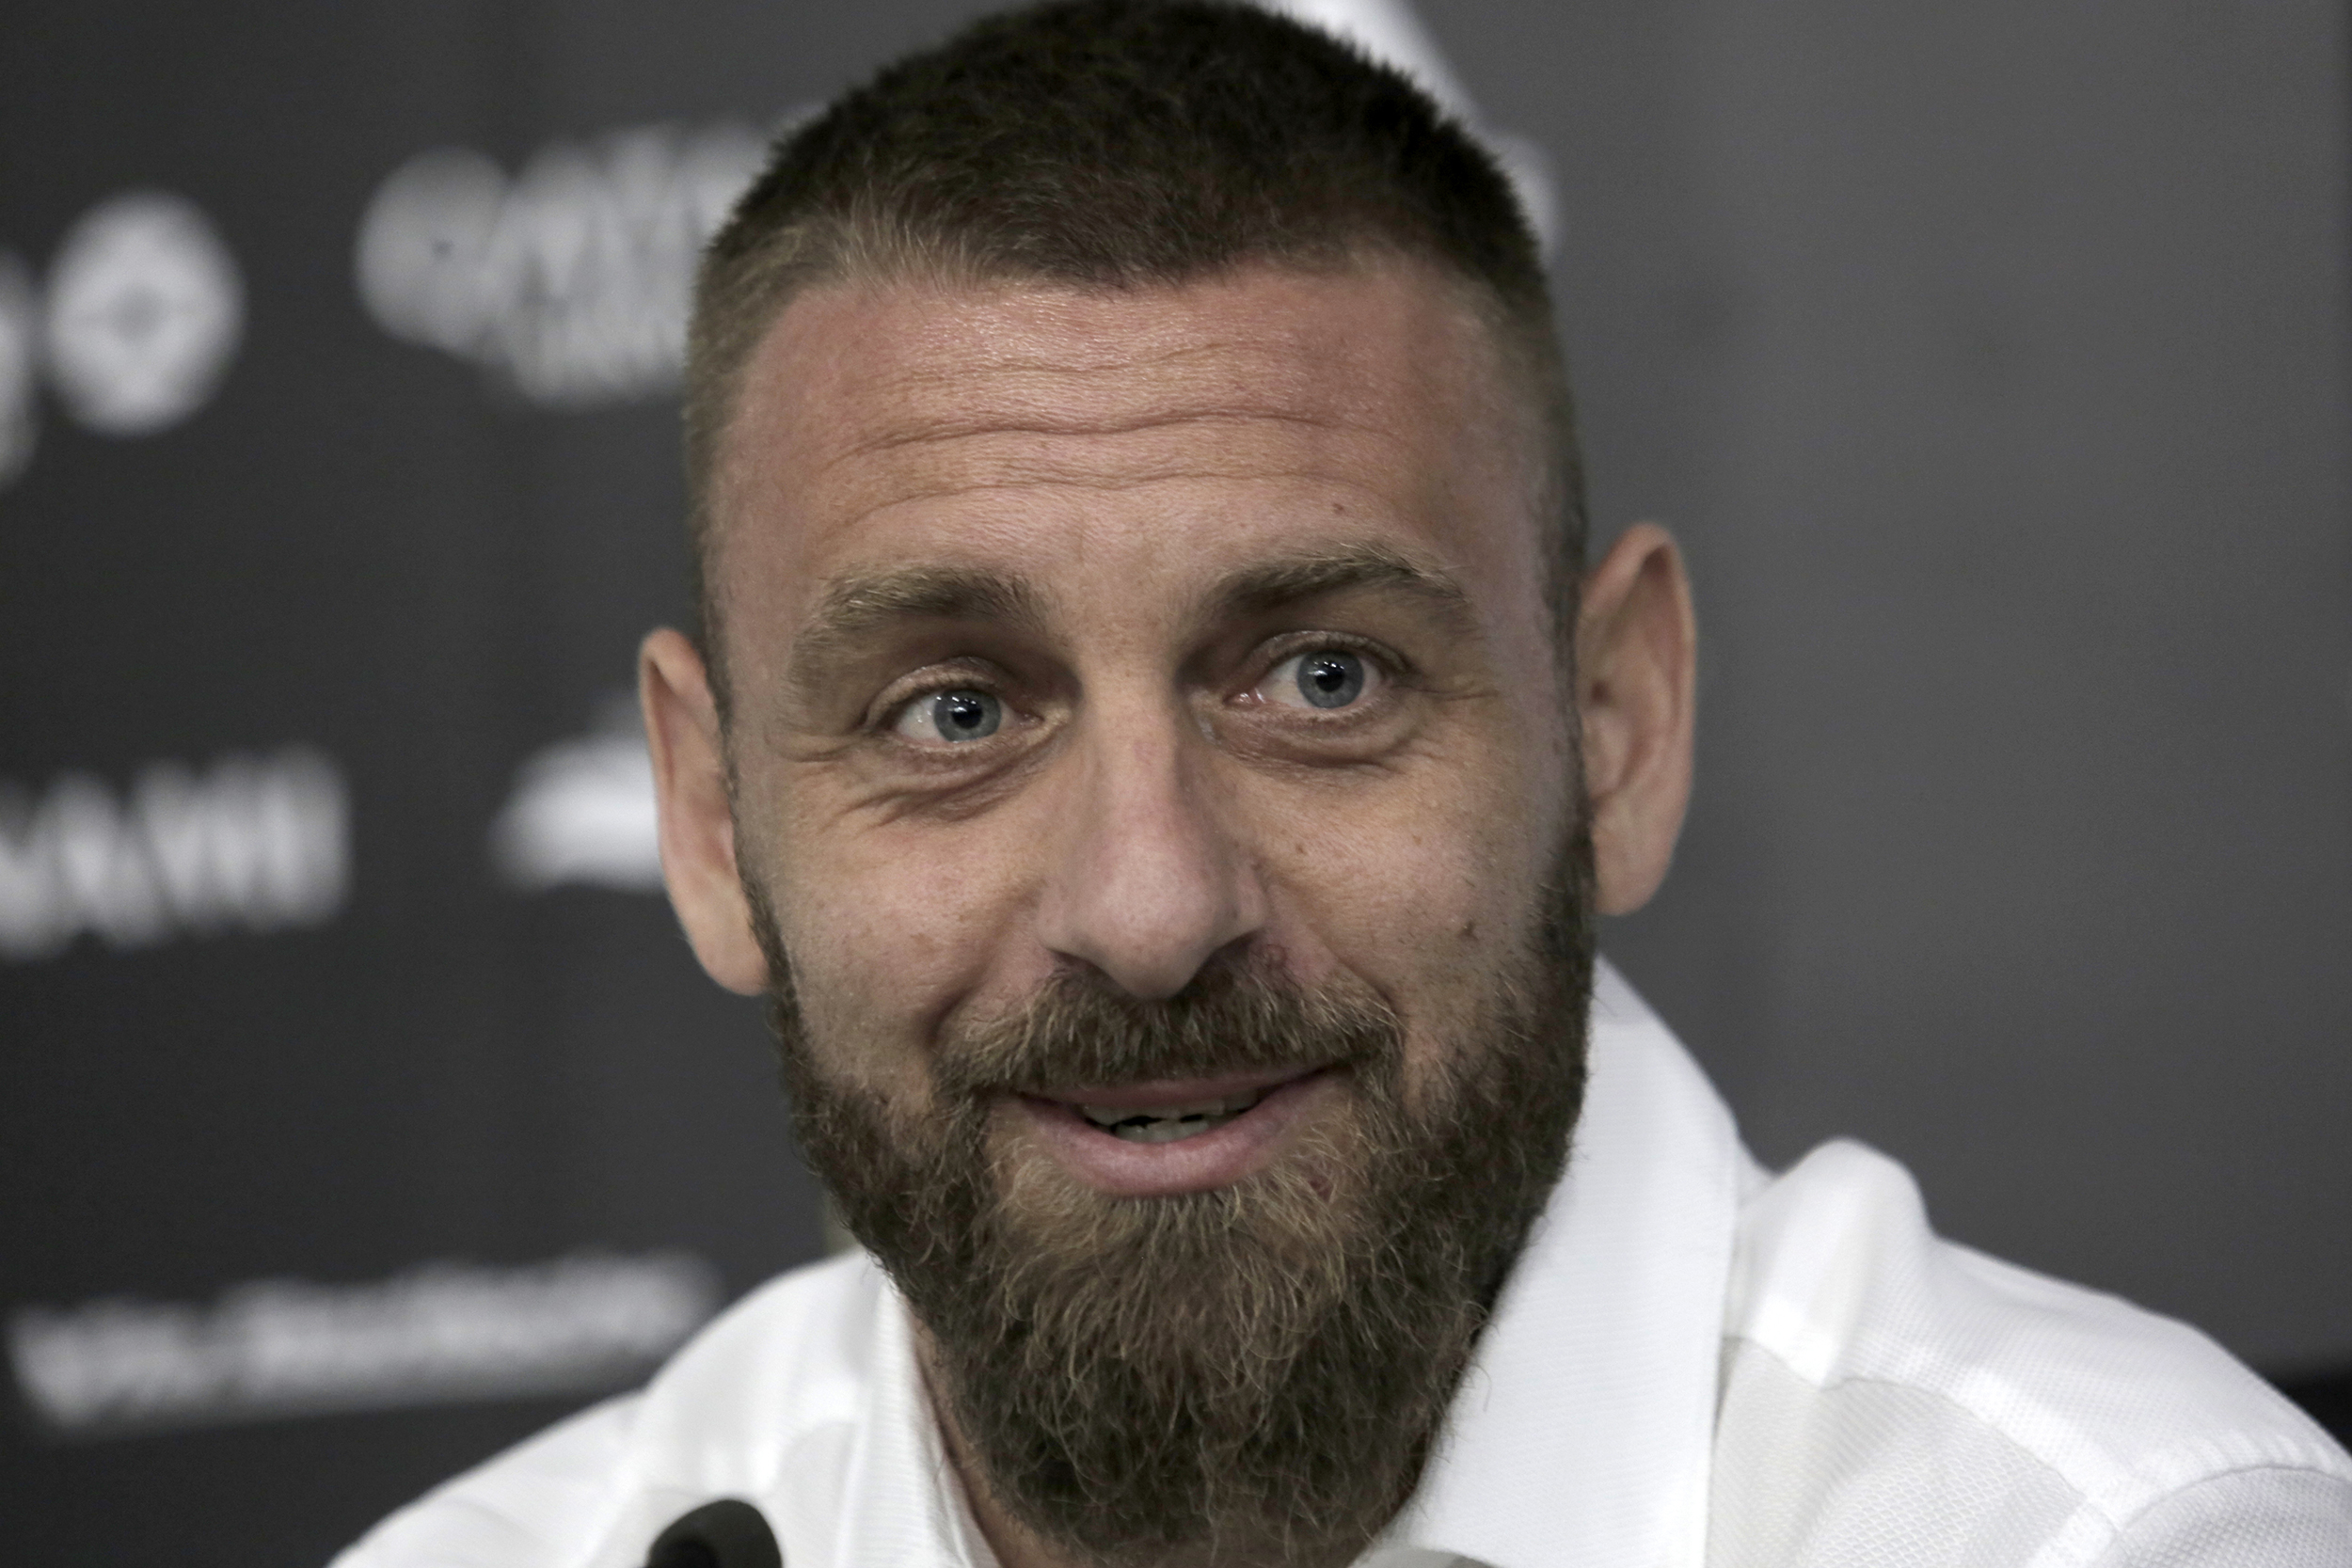 Roma inevitably moved quickly after firing José Mourinho, picking club legend Daniele De Rossi to fill the opening. The parties were already in talks.